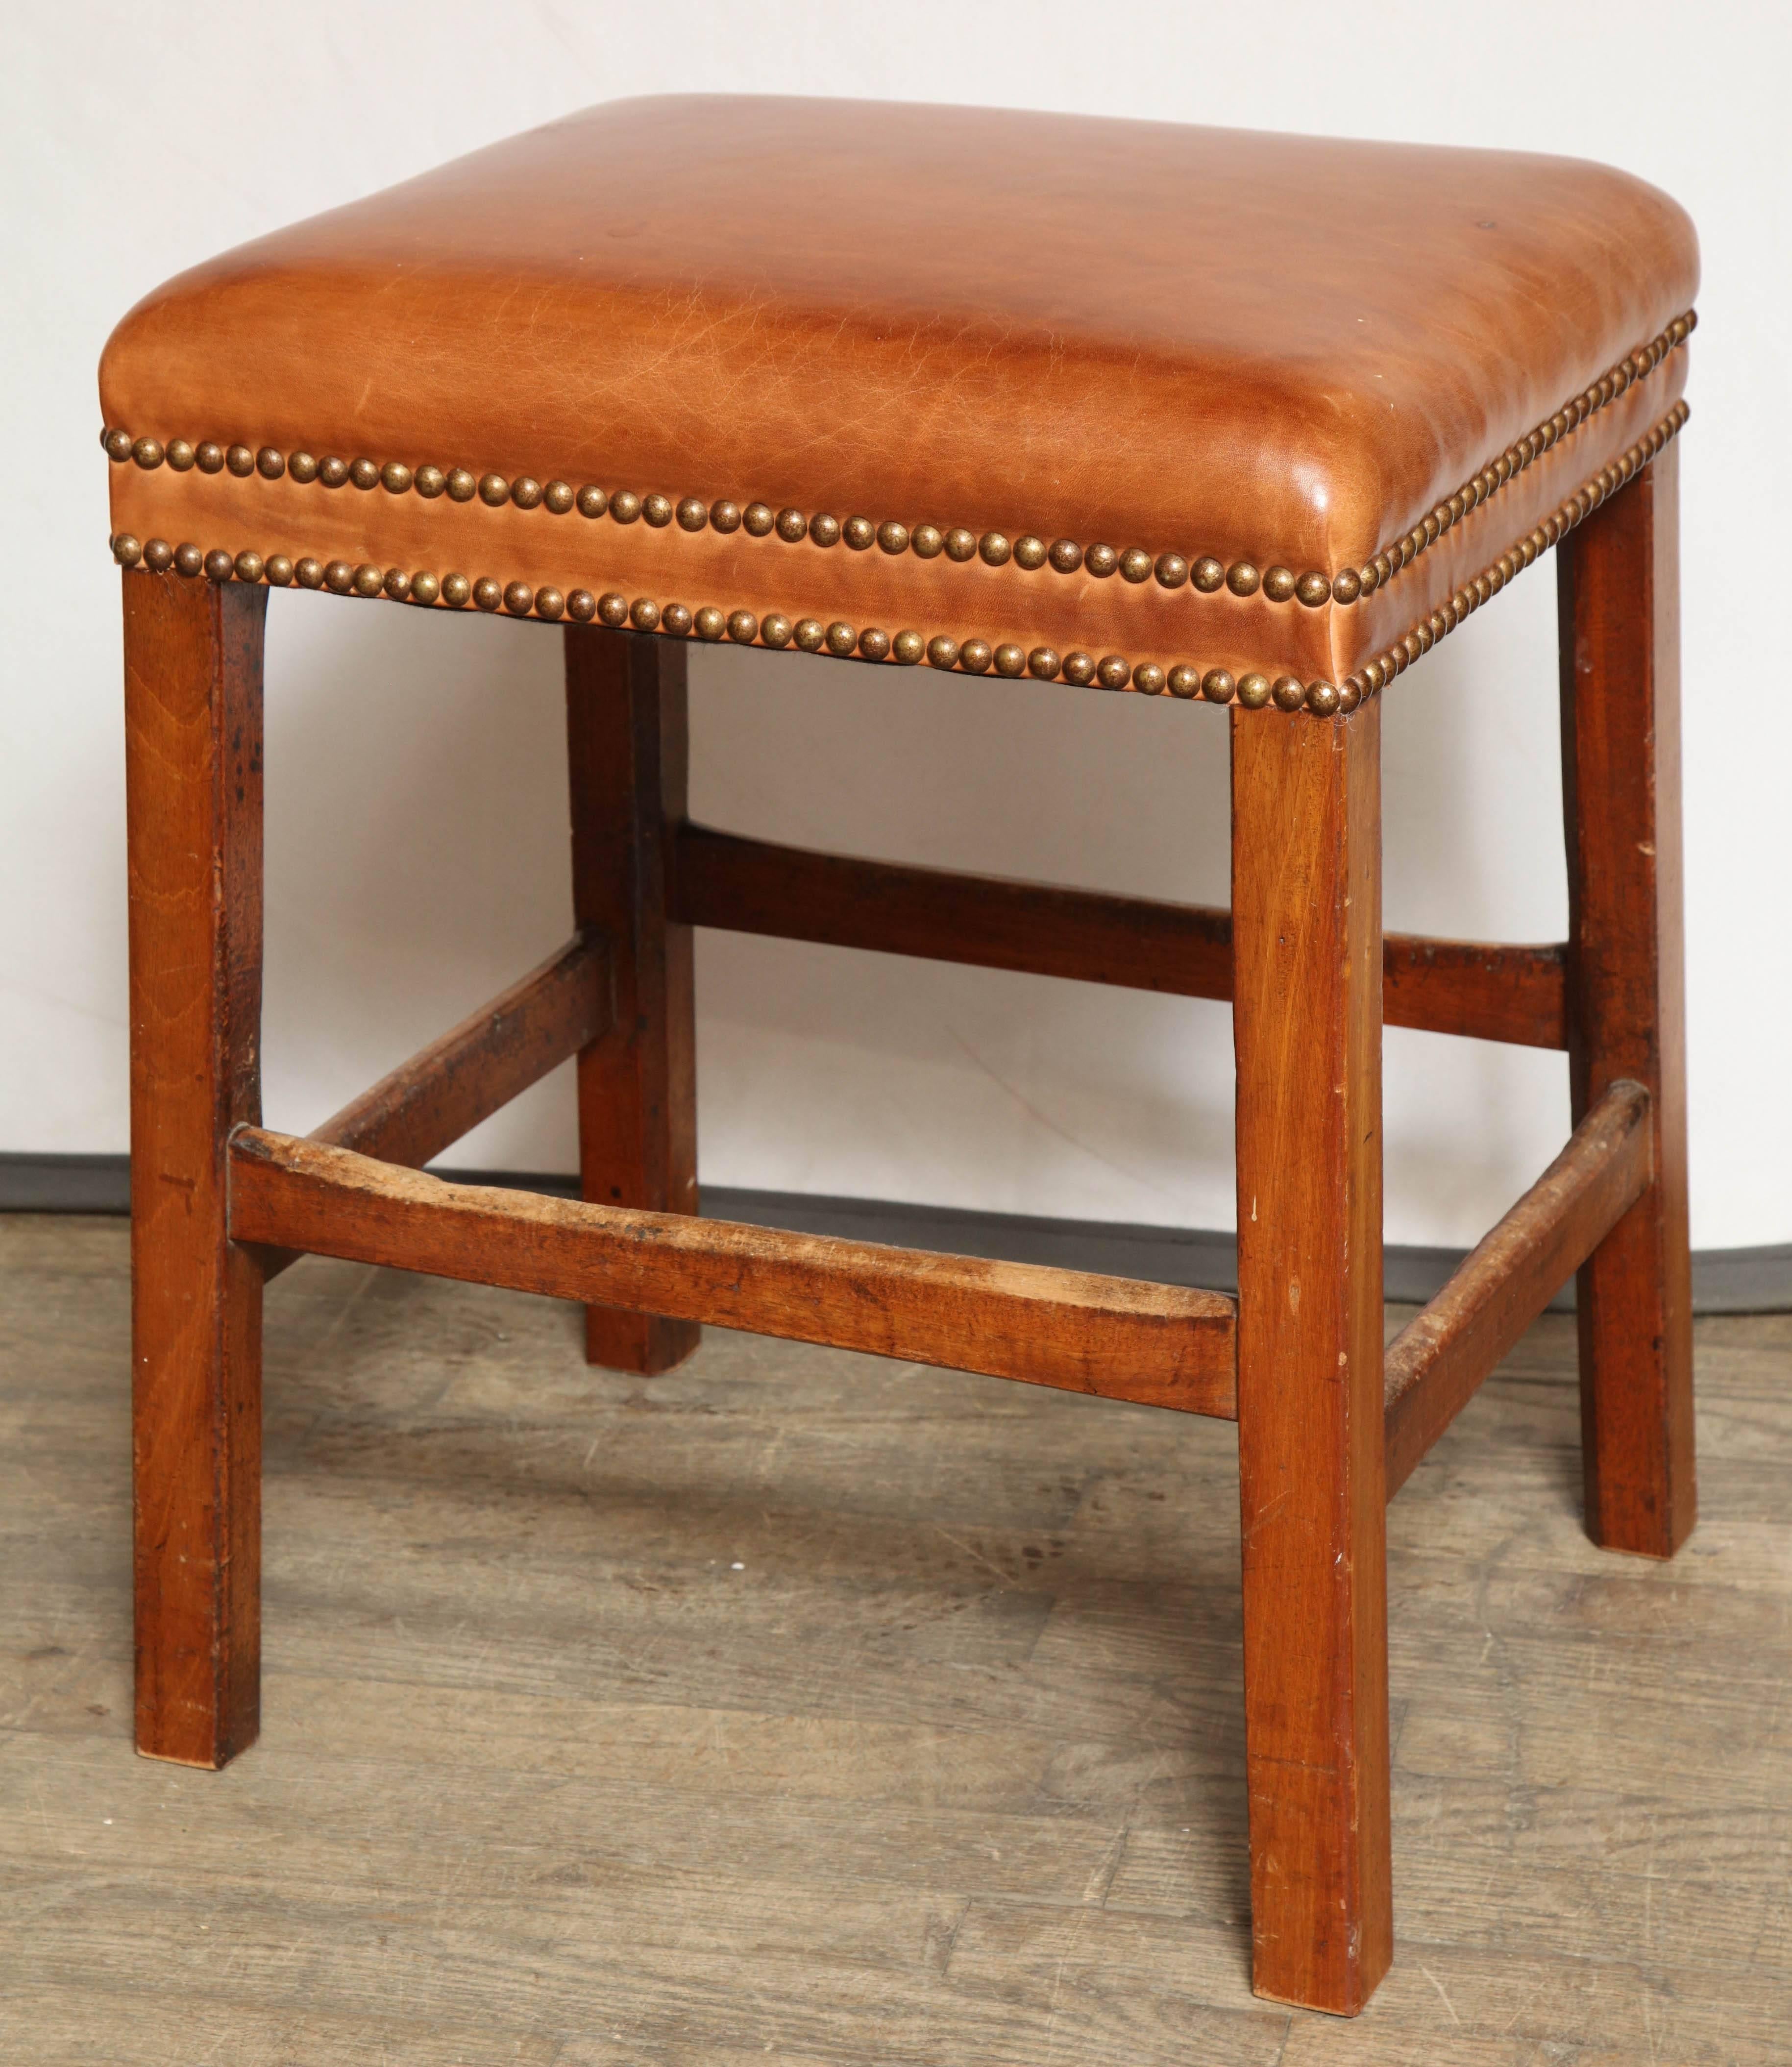 English Pair of Antique Stools with Leather Seats